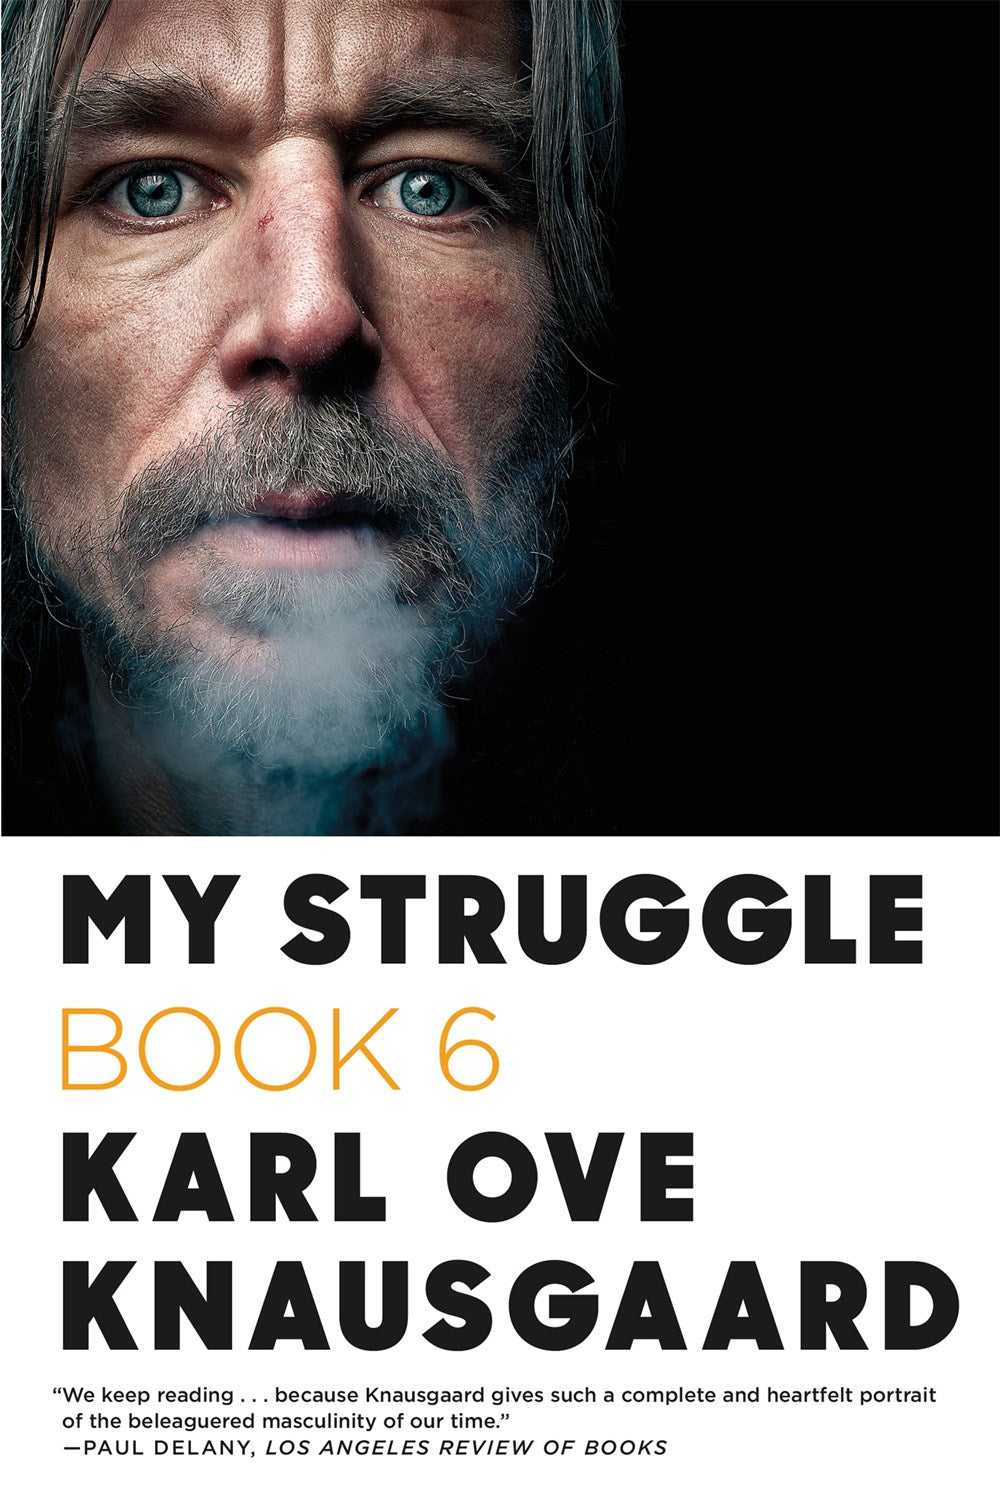 My Struggle: Book 6 (The End) by Karl Ove Knausgaard (Translated by Don Bartlett)